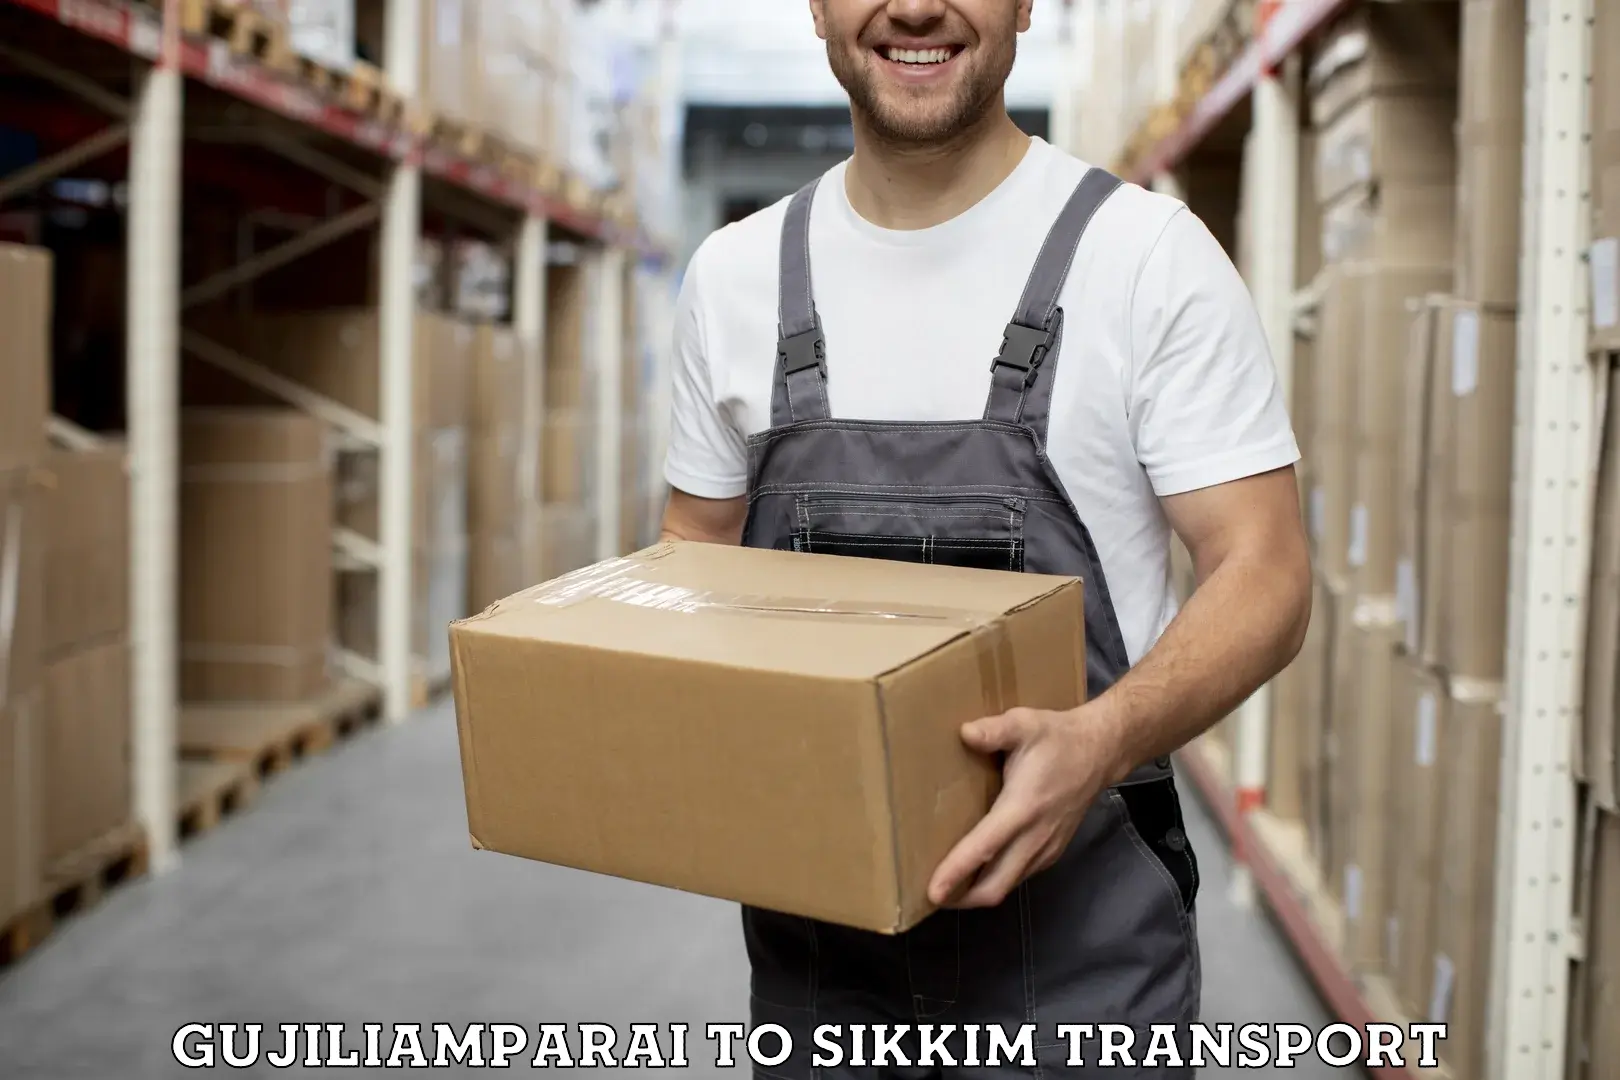 Package delivery services Gujiliamparai to Mangan